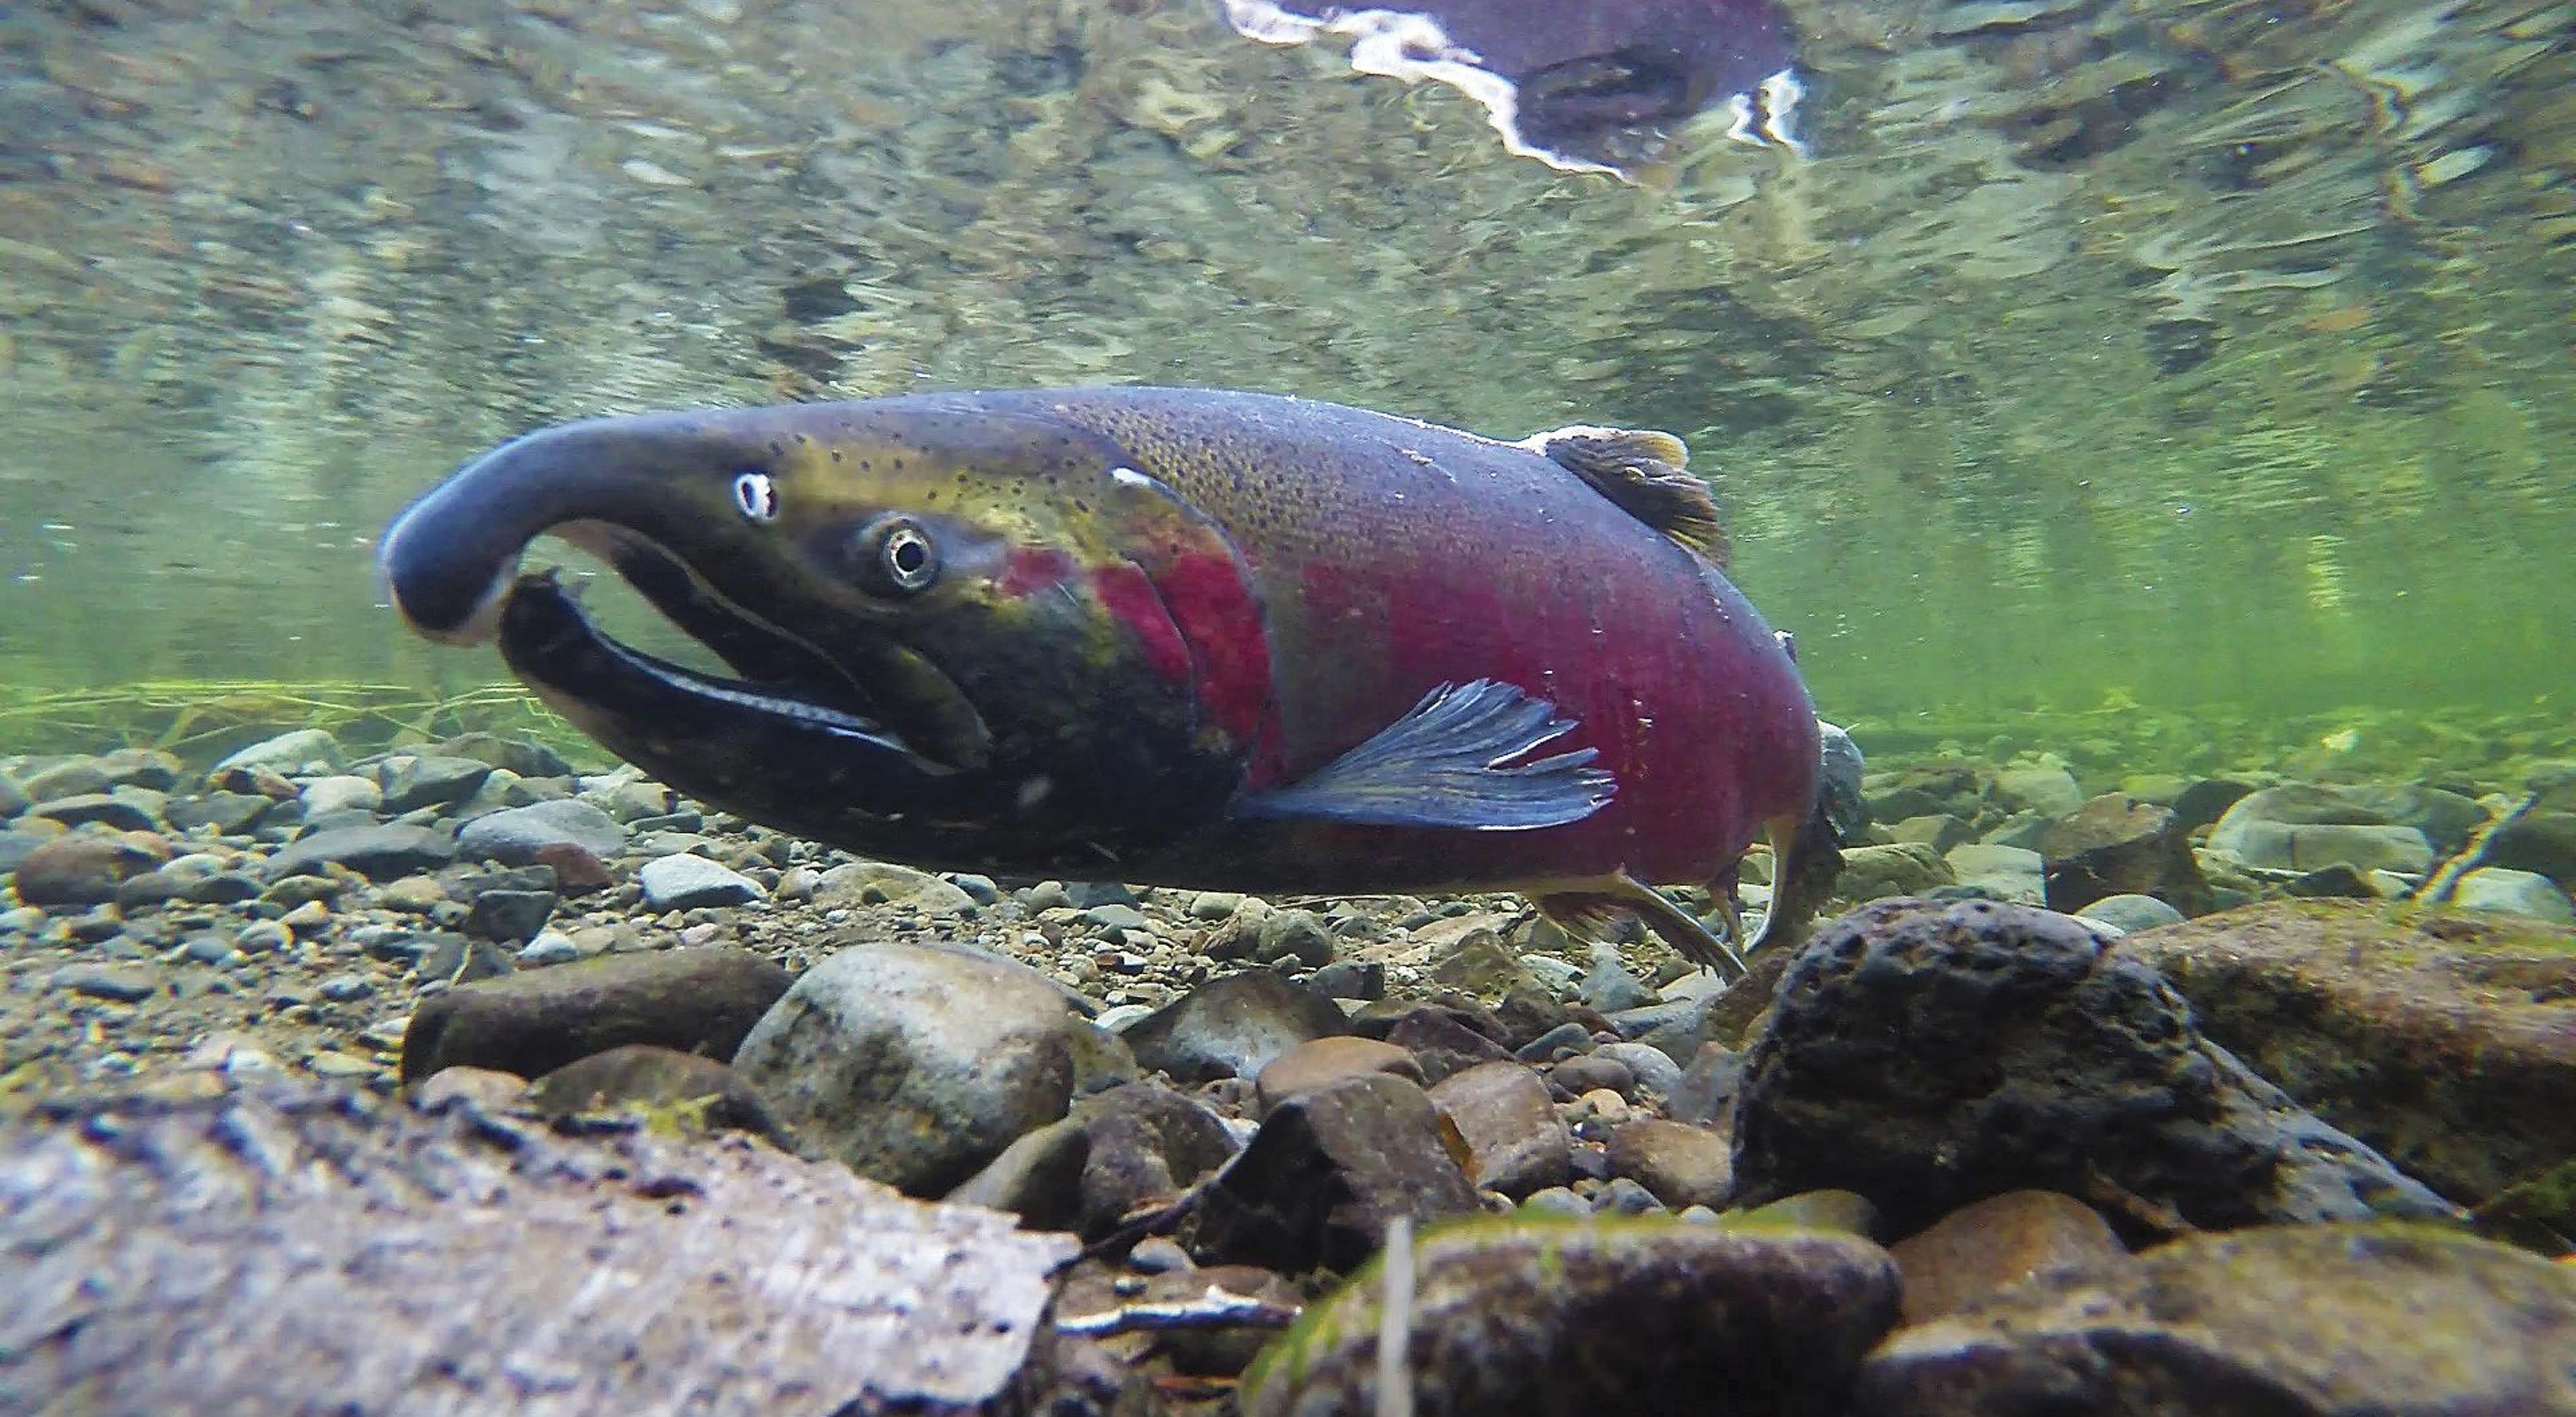 Underwater closeup of a large, red salmon with a hooked upper jaw.